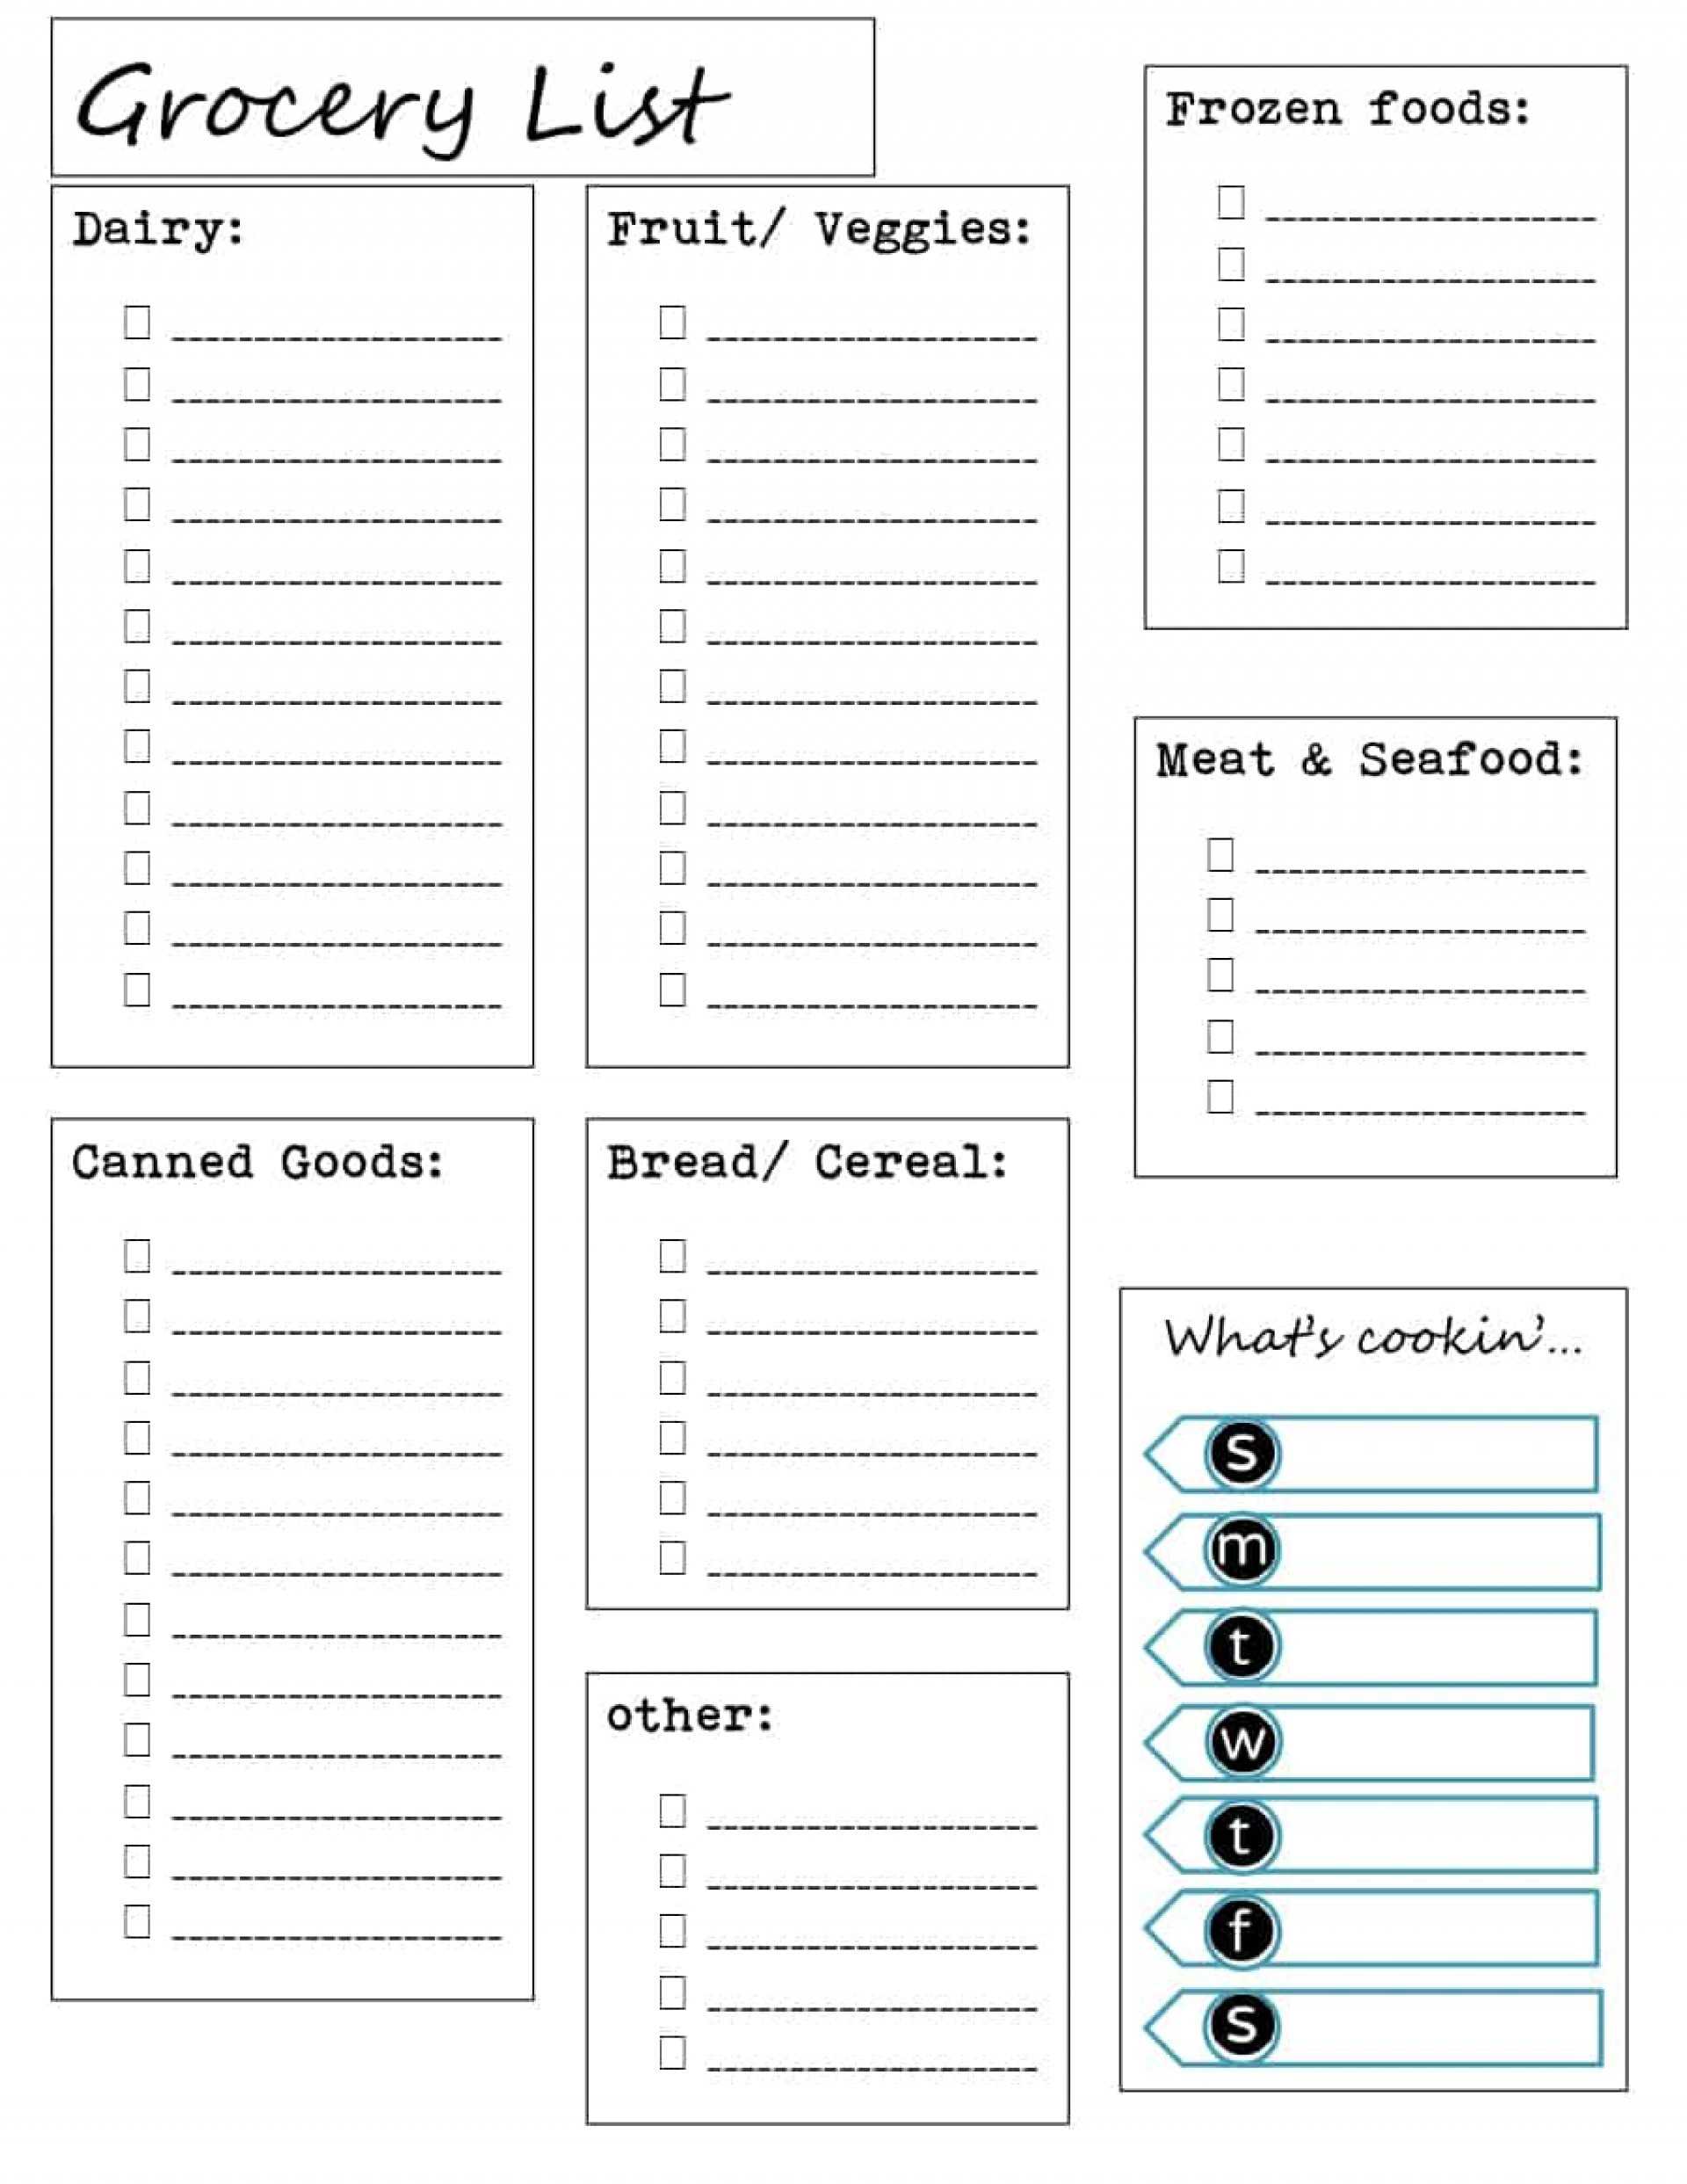 Printable Grocery Listcategory | Printablepedia Within Blank Grocery Shopping List Template